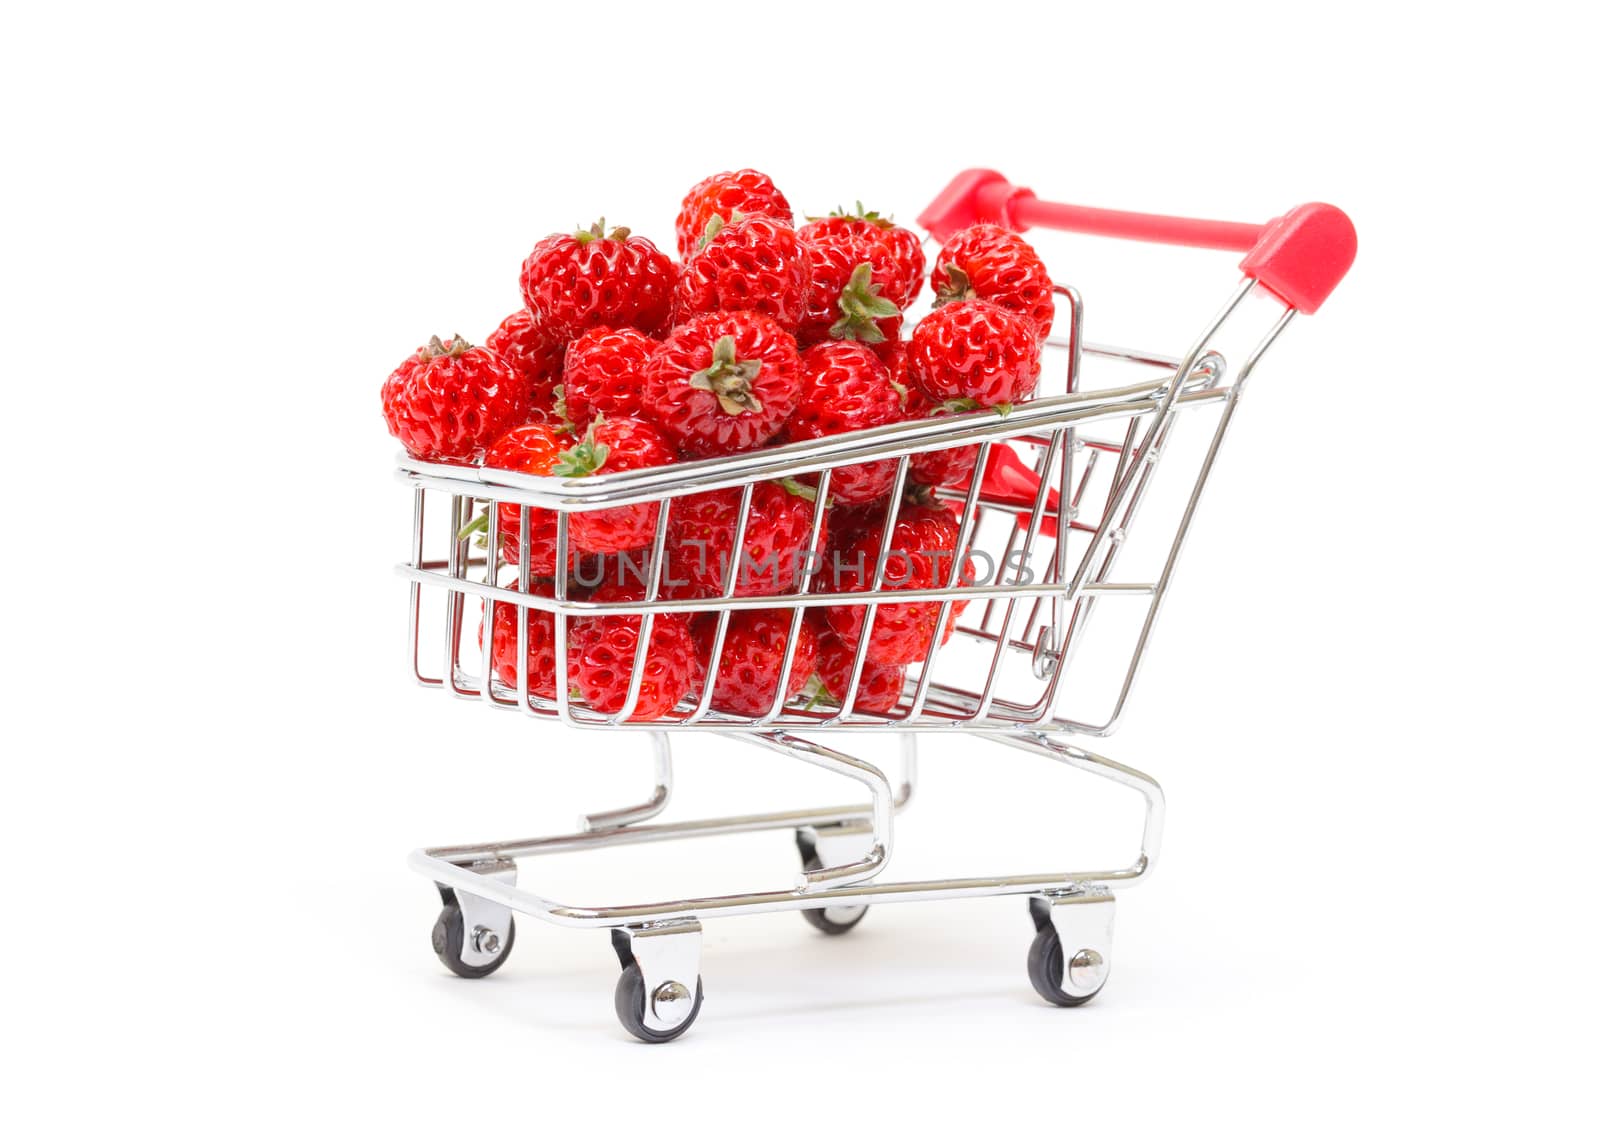 Ripe Red strawberries in shopping cart, on white background